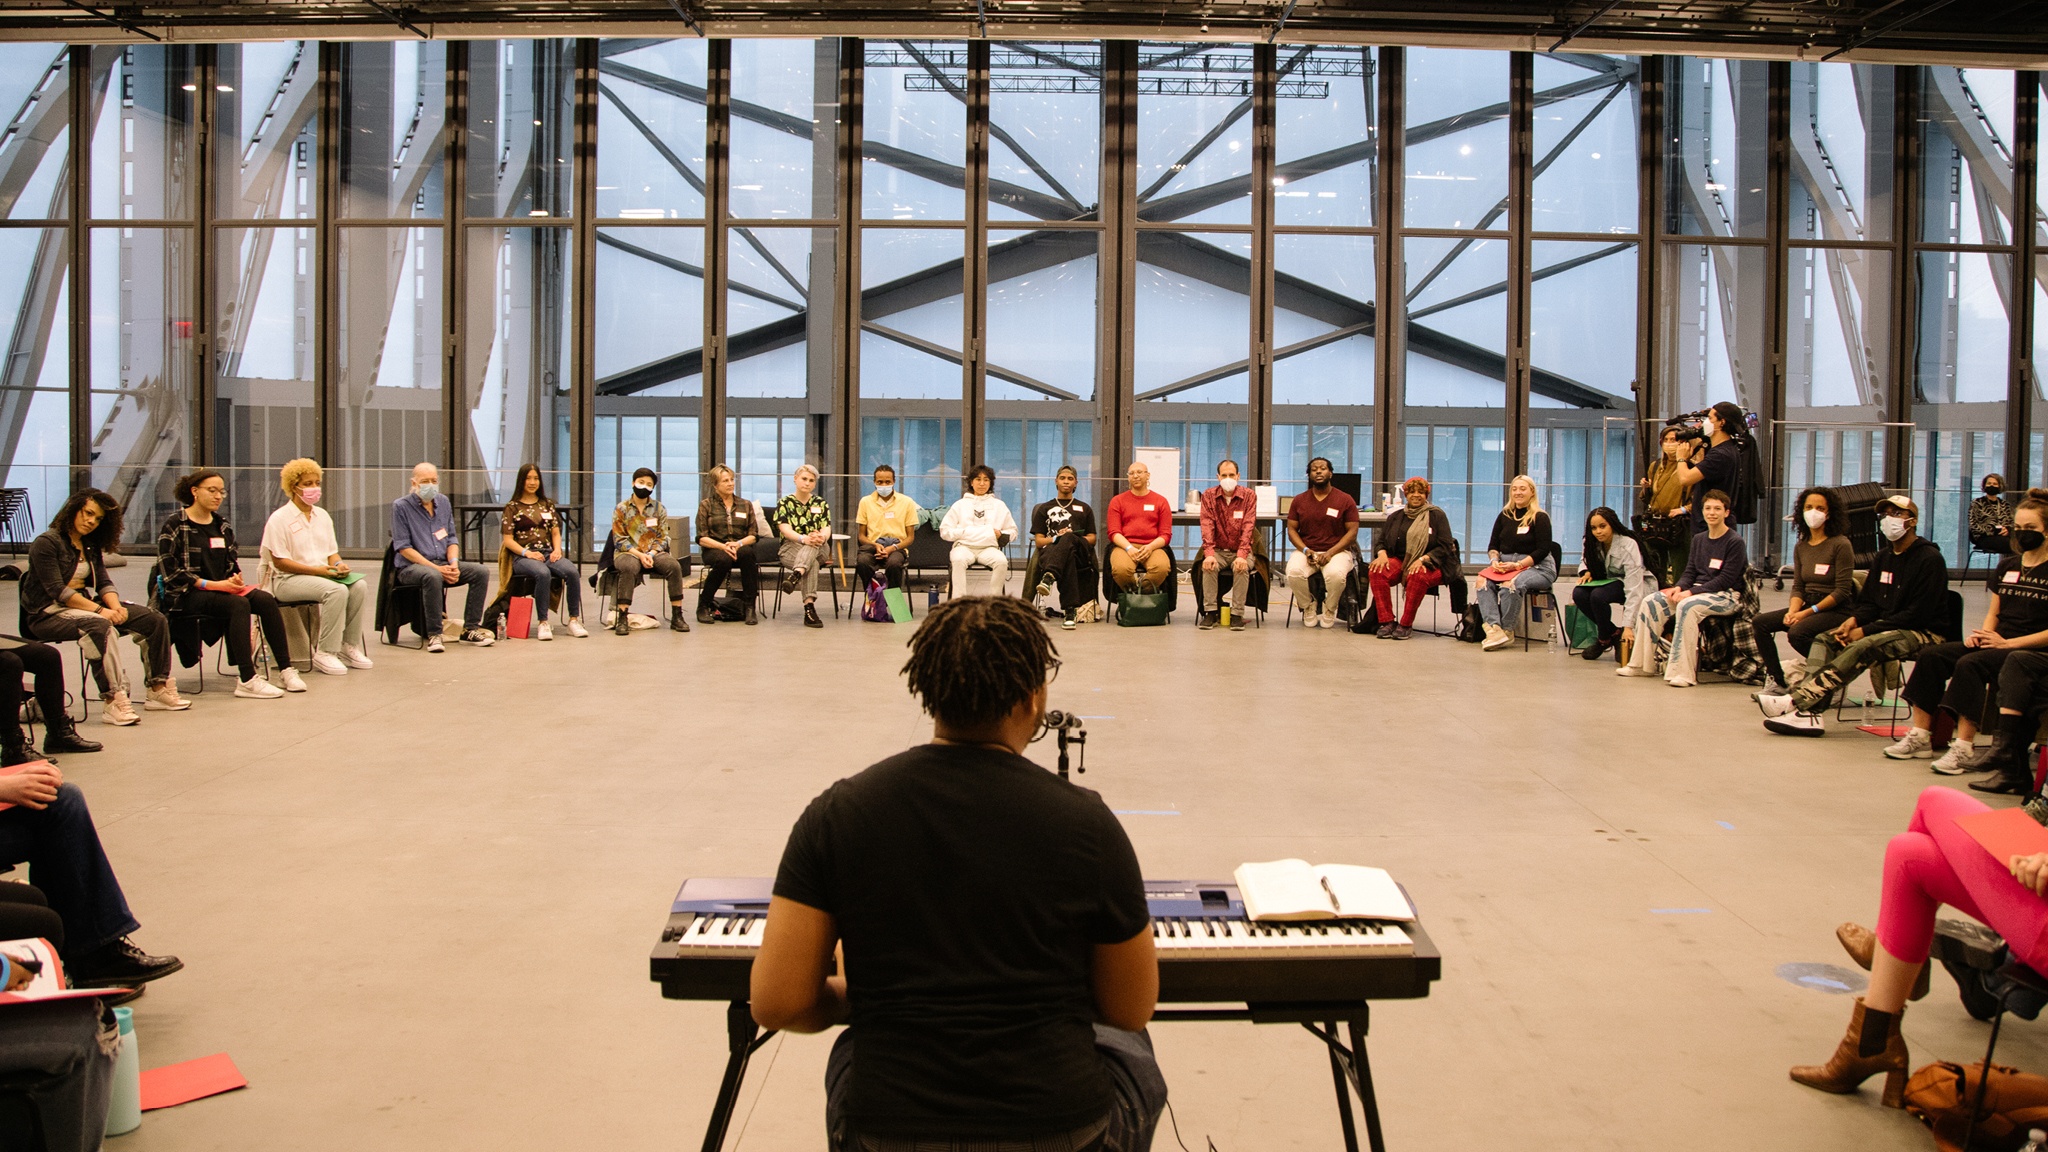 The artist Troy Anthony sits at a keyboard with his back to the camera facing a semicircle of people of various ages and races seated across a wide performance space with high ceilings at The Shed